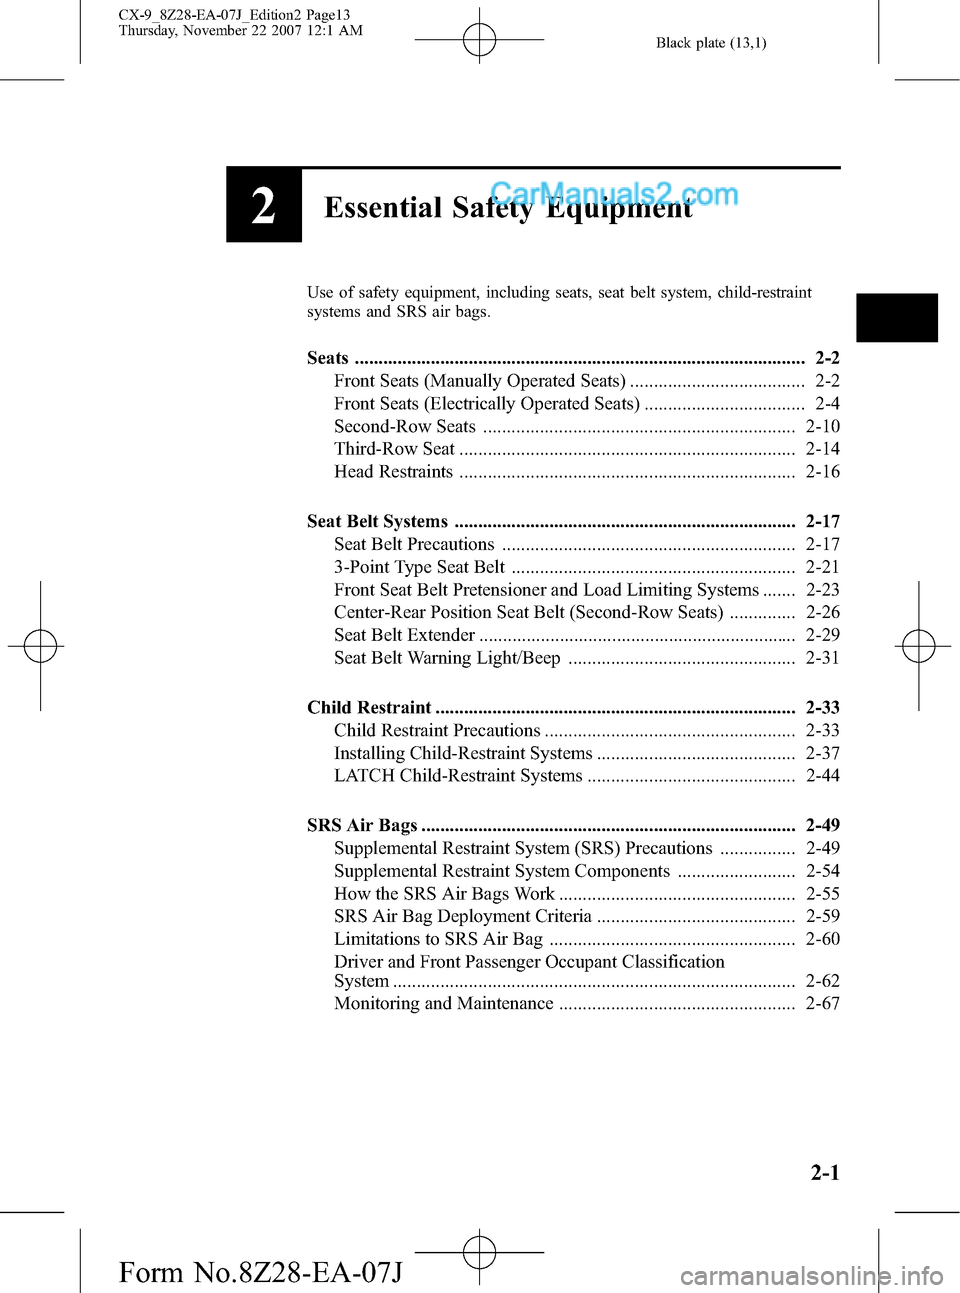 MAZDA MODEL CX-9 2008  Owners Manual (in English) Black plate (13,1)
2Essential Safety Equipment
Use of safety equipment, including seats, seat belt system, child-restraint
systems and SRS air bags.
Seats .............................................